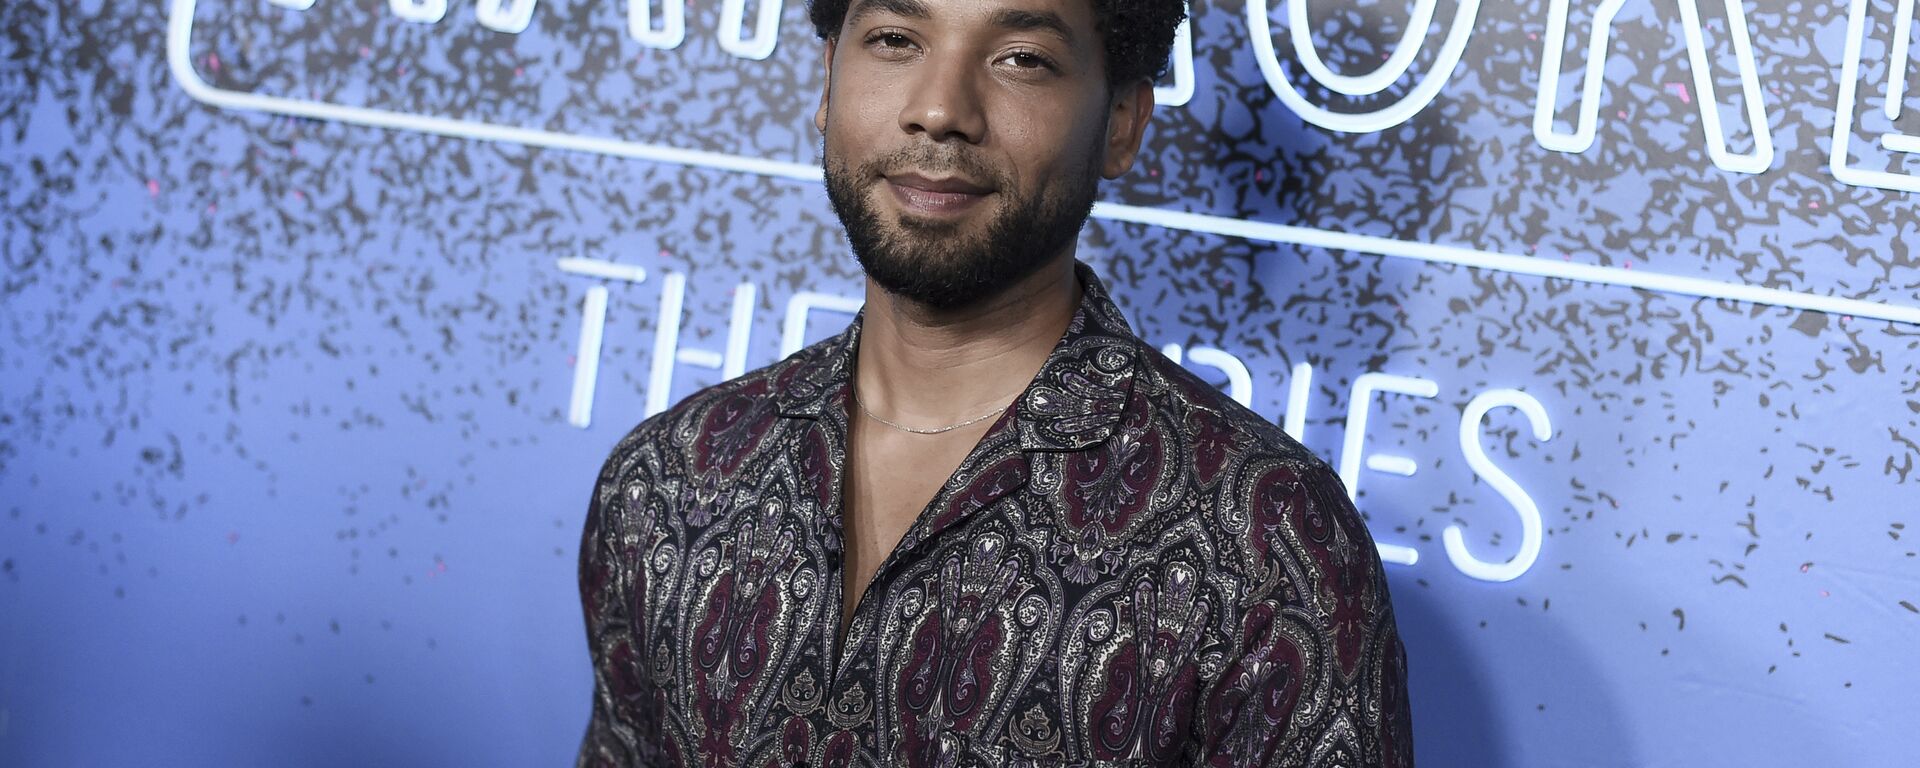 Jussie Smollett attends Carpool Karaoke: The Series launch event at the Chateau Marmont Hotel on Monday, Aug. 7, 2017, in Los Angeles.  - Sputnik International, 1920, 07.12.2021